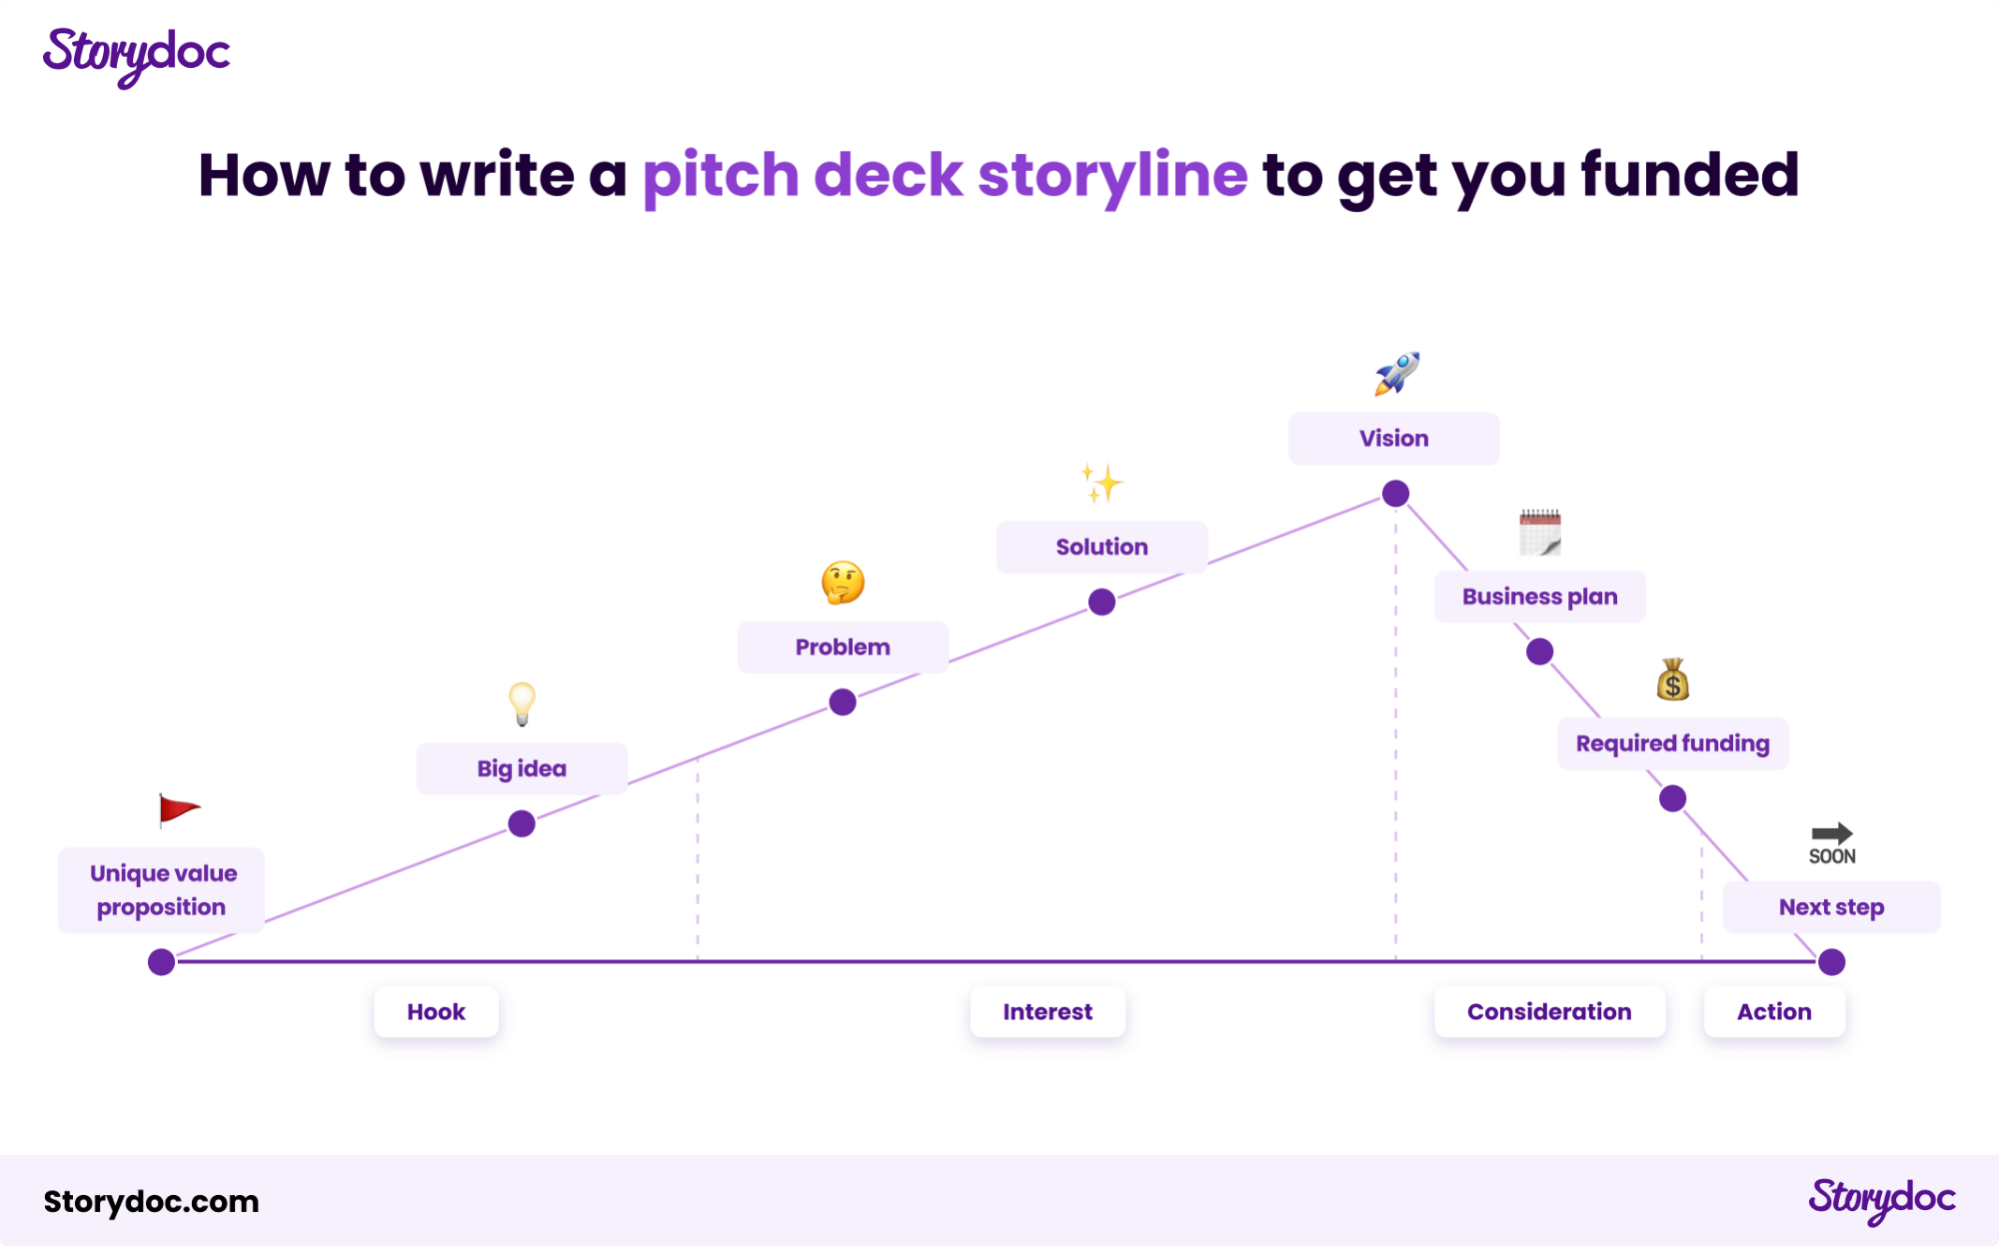 How to write a pitch deck storyline